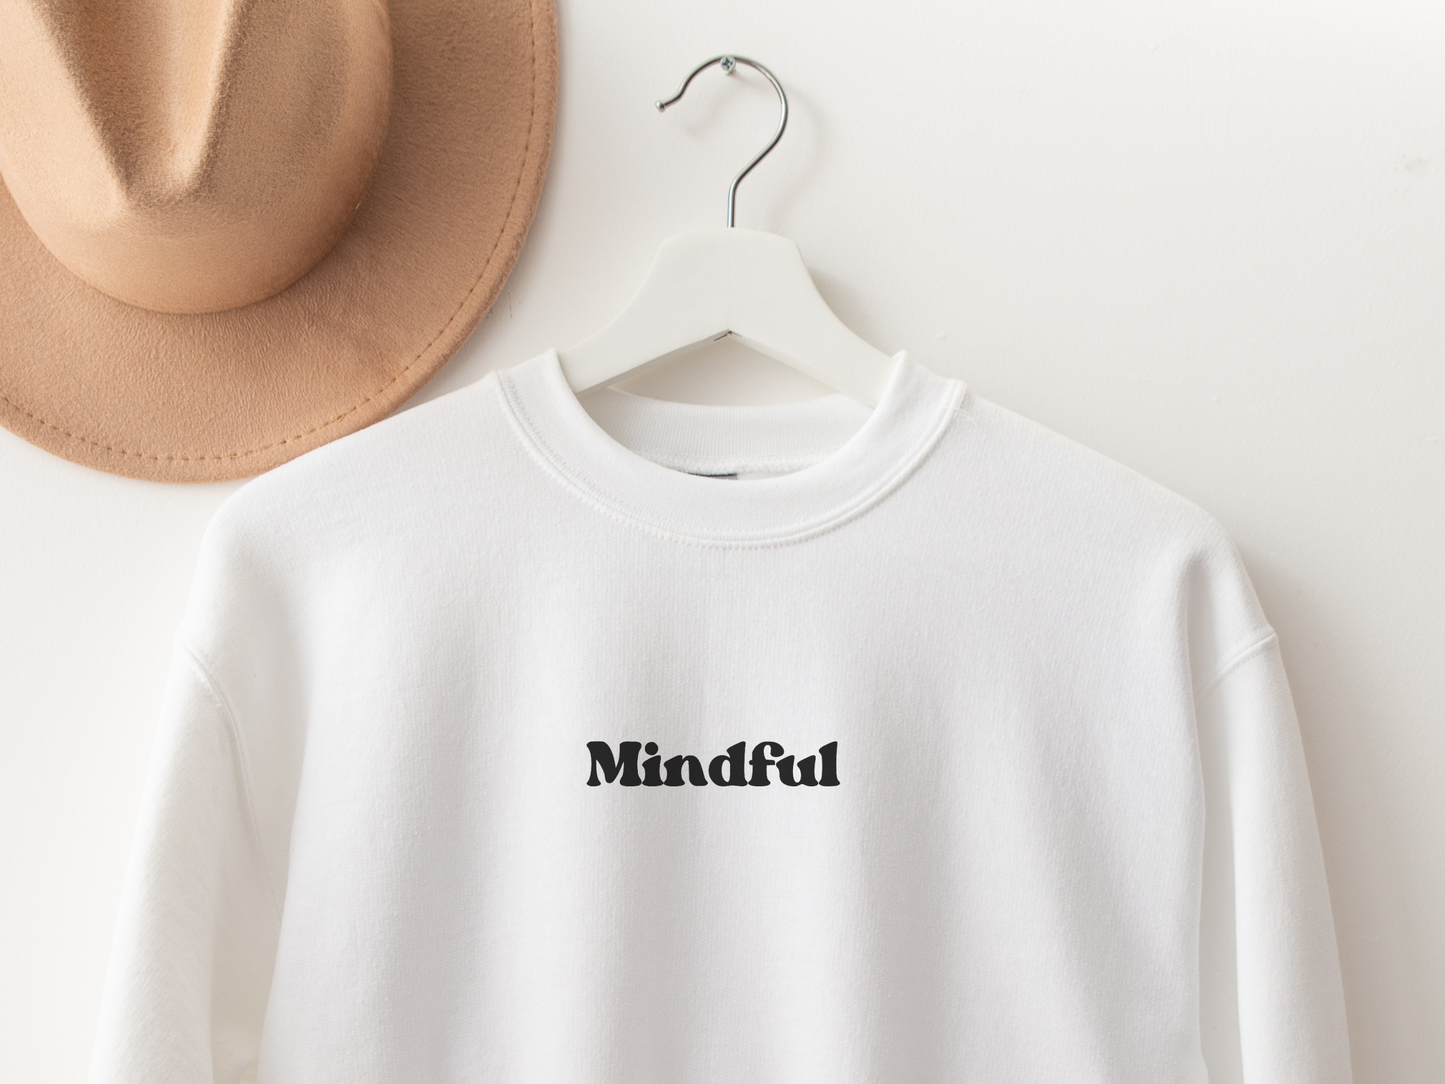 Mindful Crewneck, Breathe In Breathe Out on Sleeve